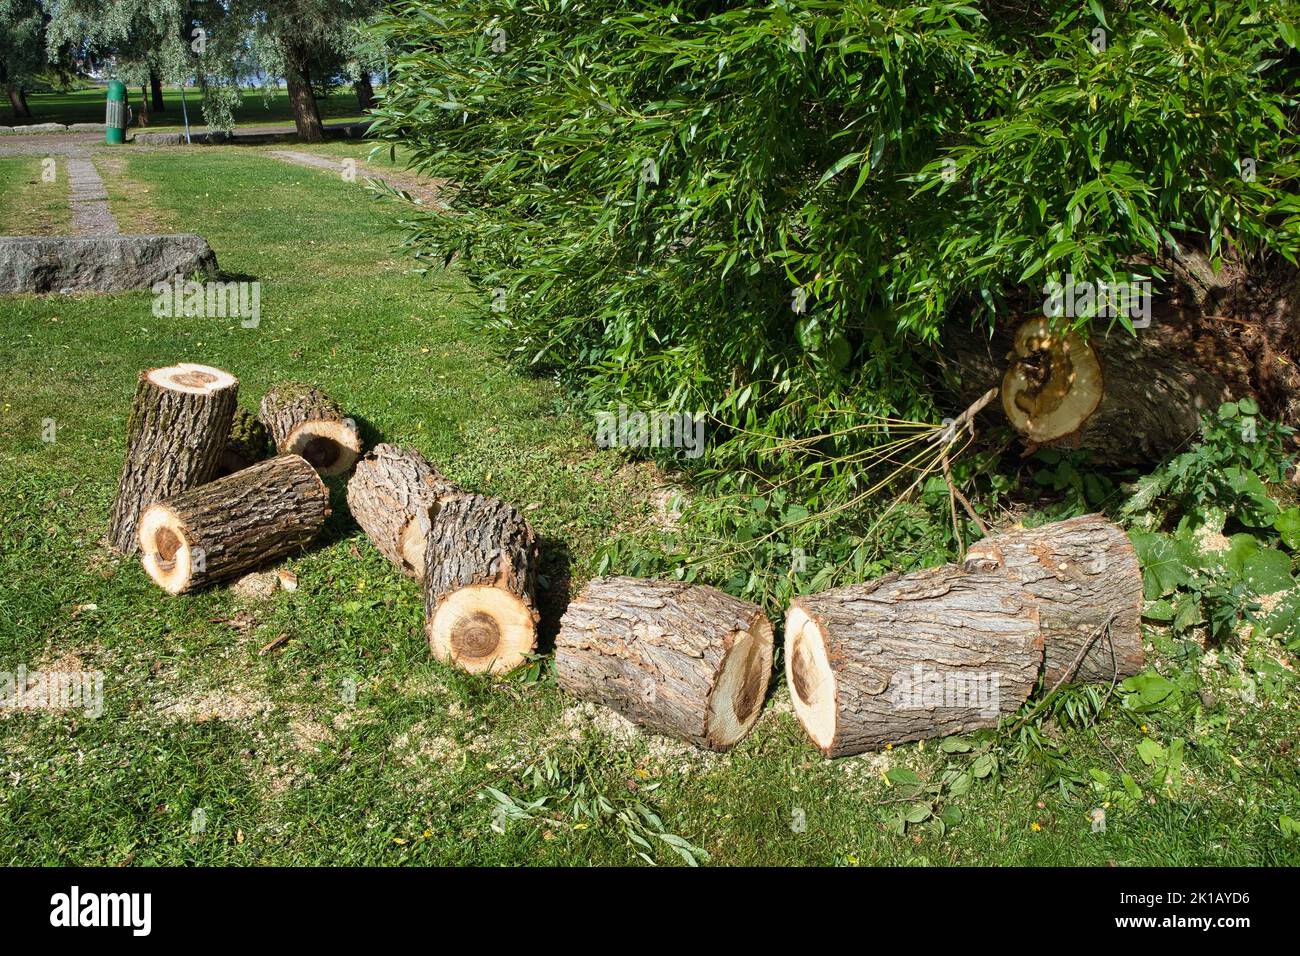 cut down tree logs in a city park Stock Photo